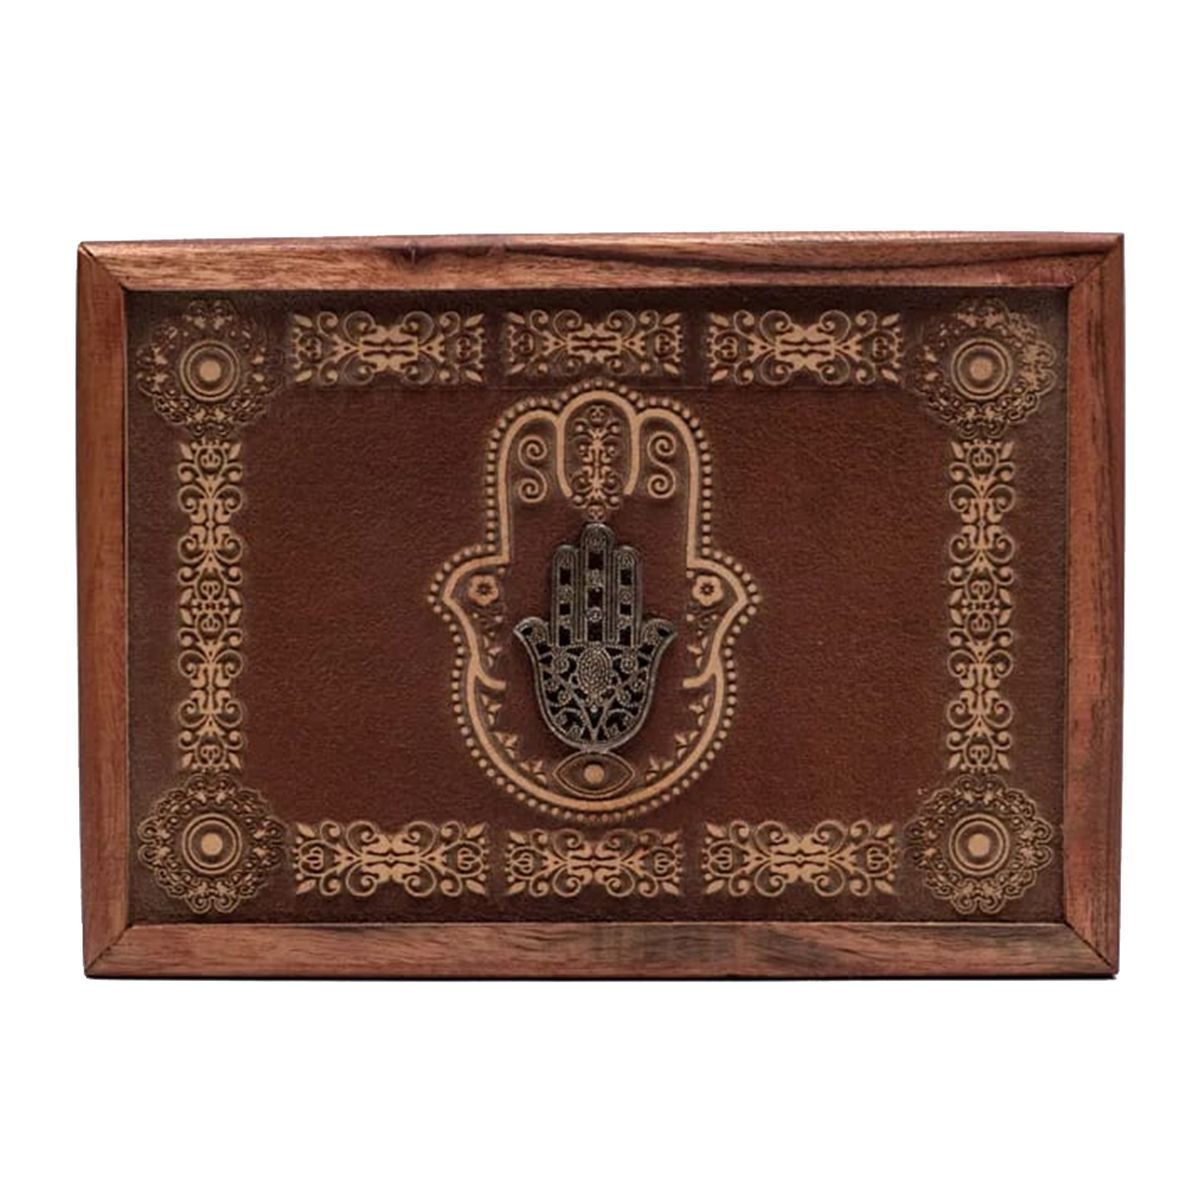 Fatima engraved small box carved